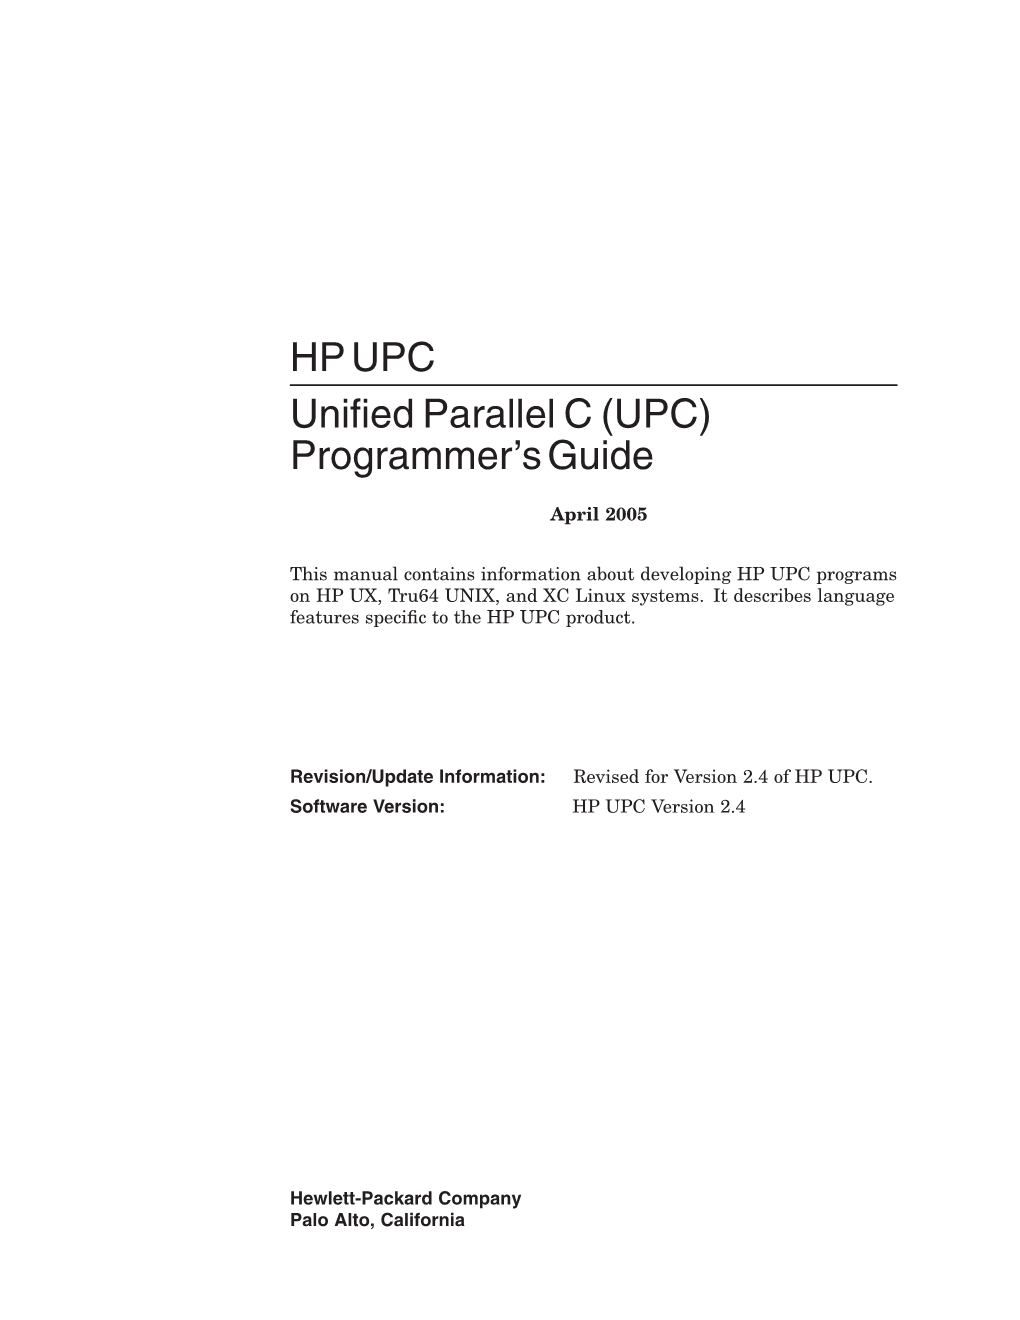 HP UPC Unified Parallel C (UPC) Programmer's Guide